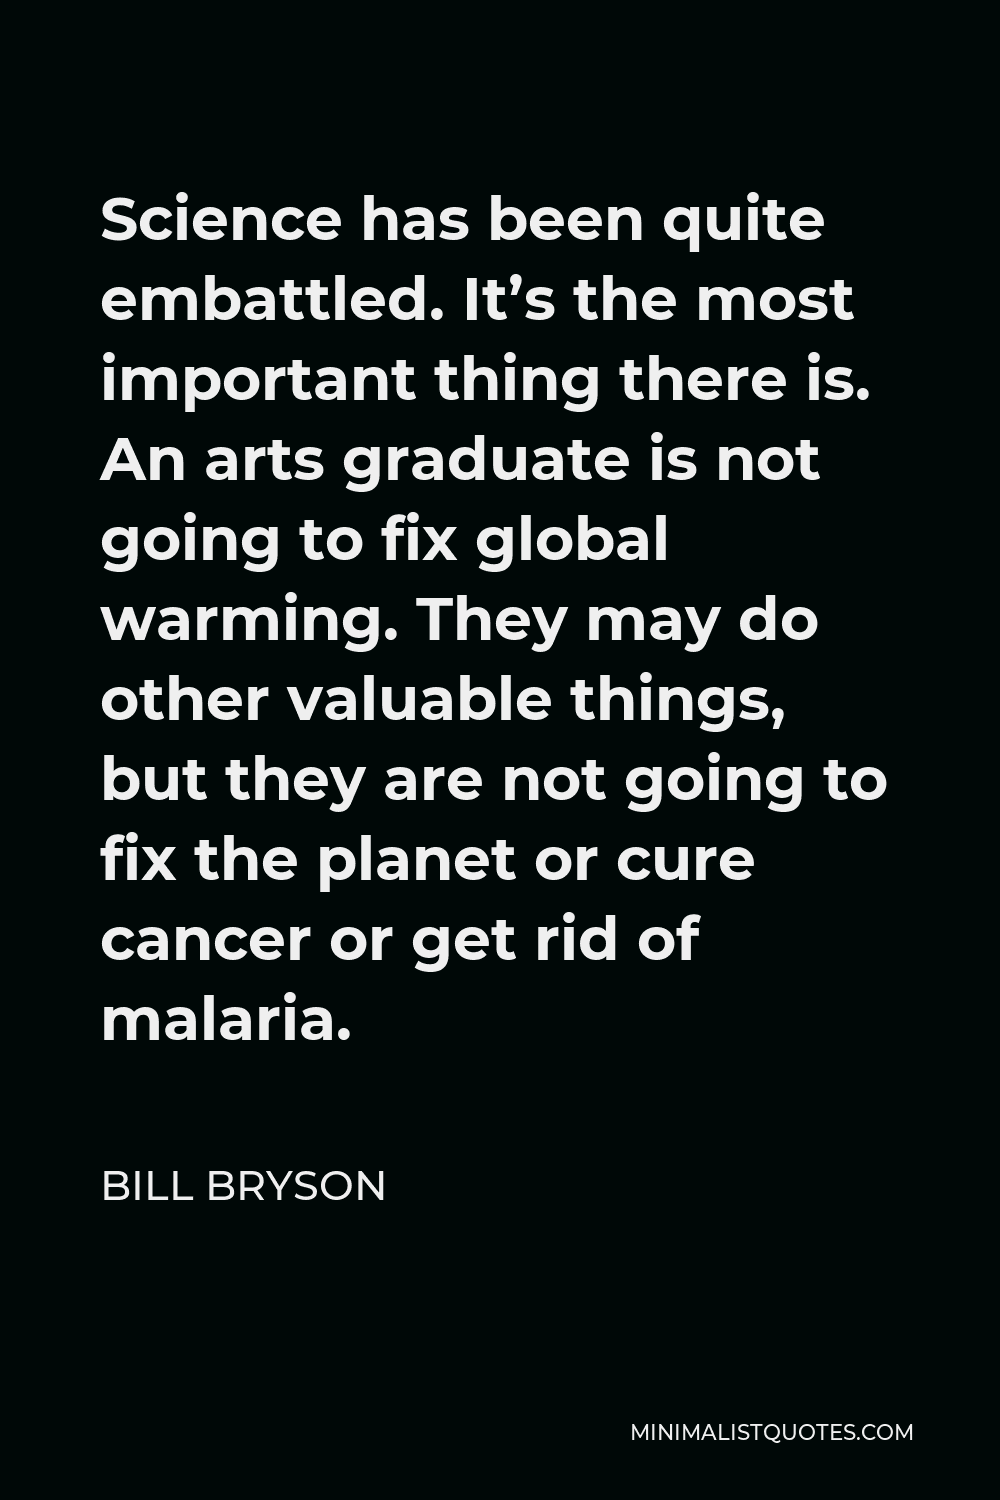 Bill Bryson Quote - Science has been quite embattled. It’s the most important thing there is. An arts graduate is not going to fix global warming. They may do other valuable things, but they are not going to fix the planet or cure cancer or get rid of malaria.